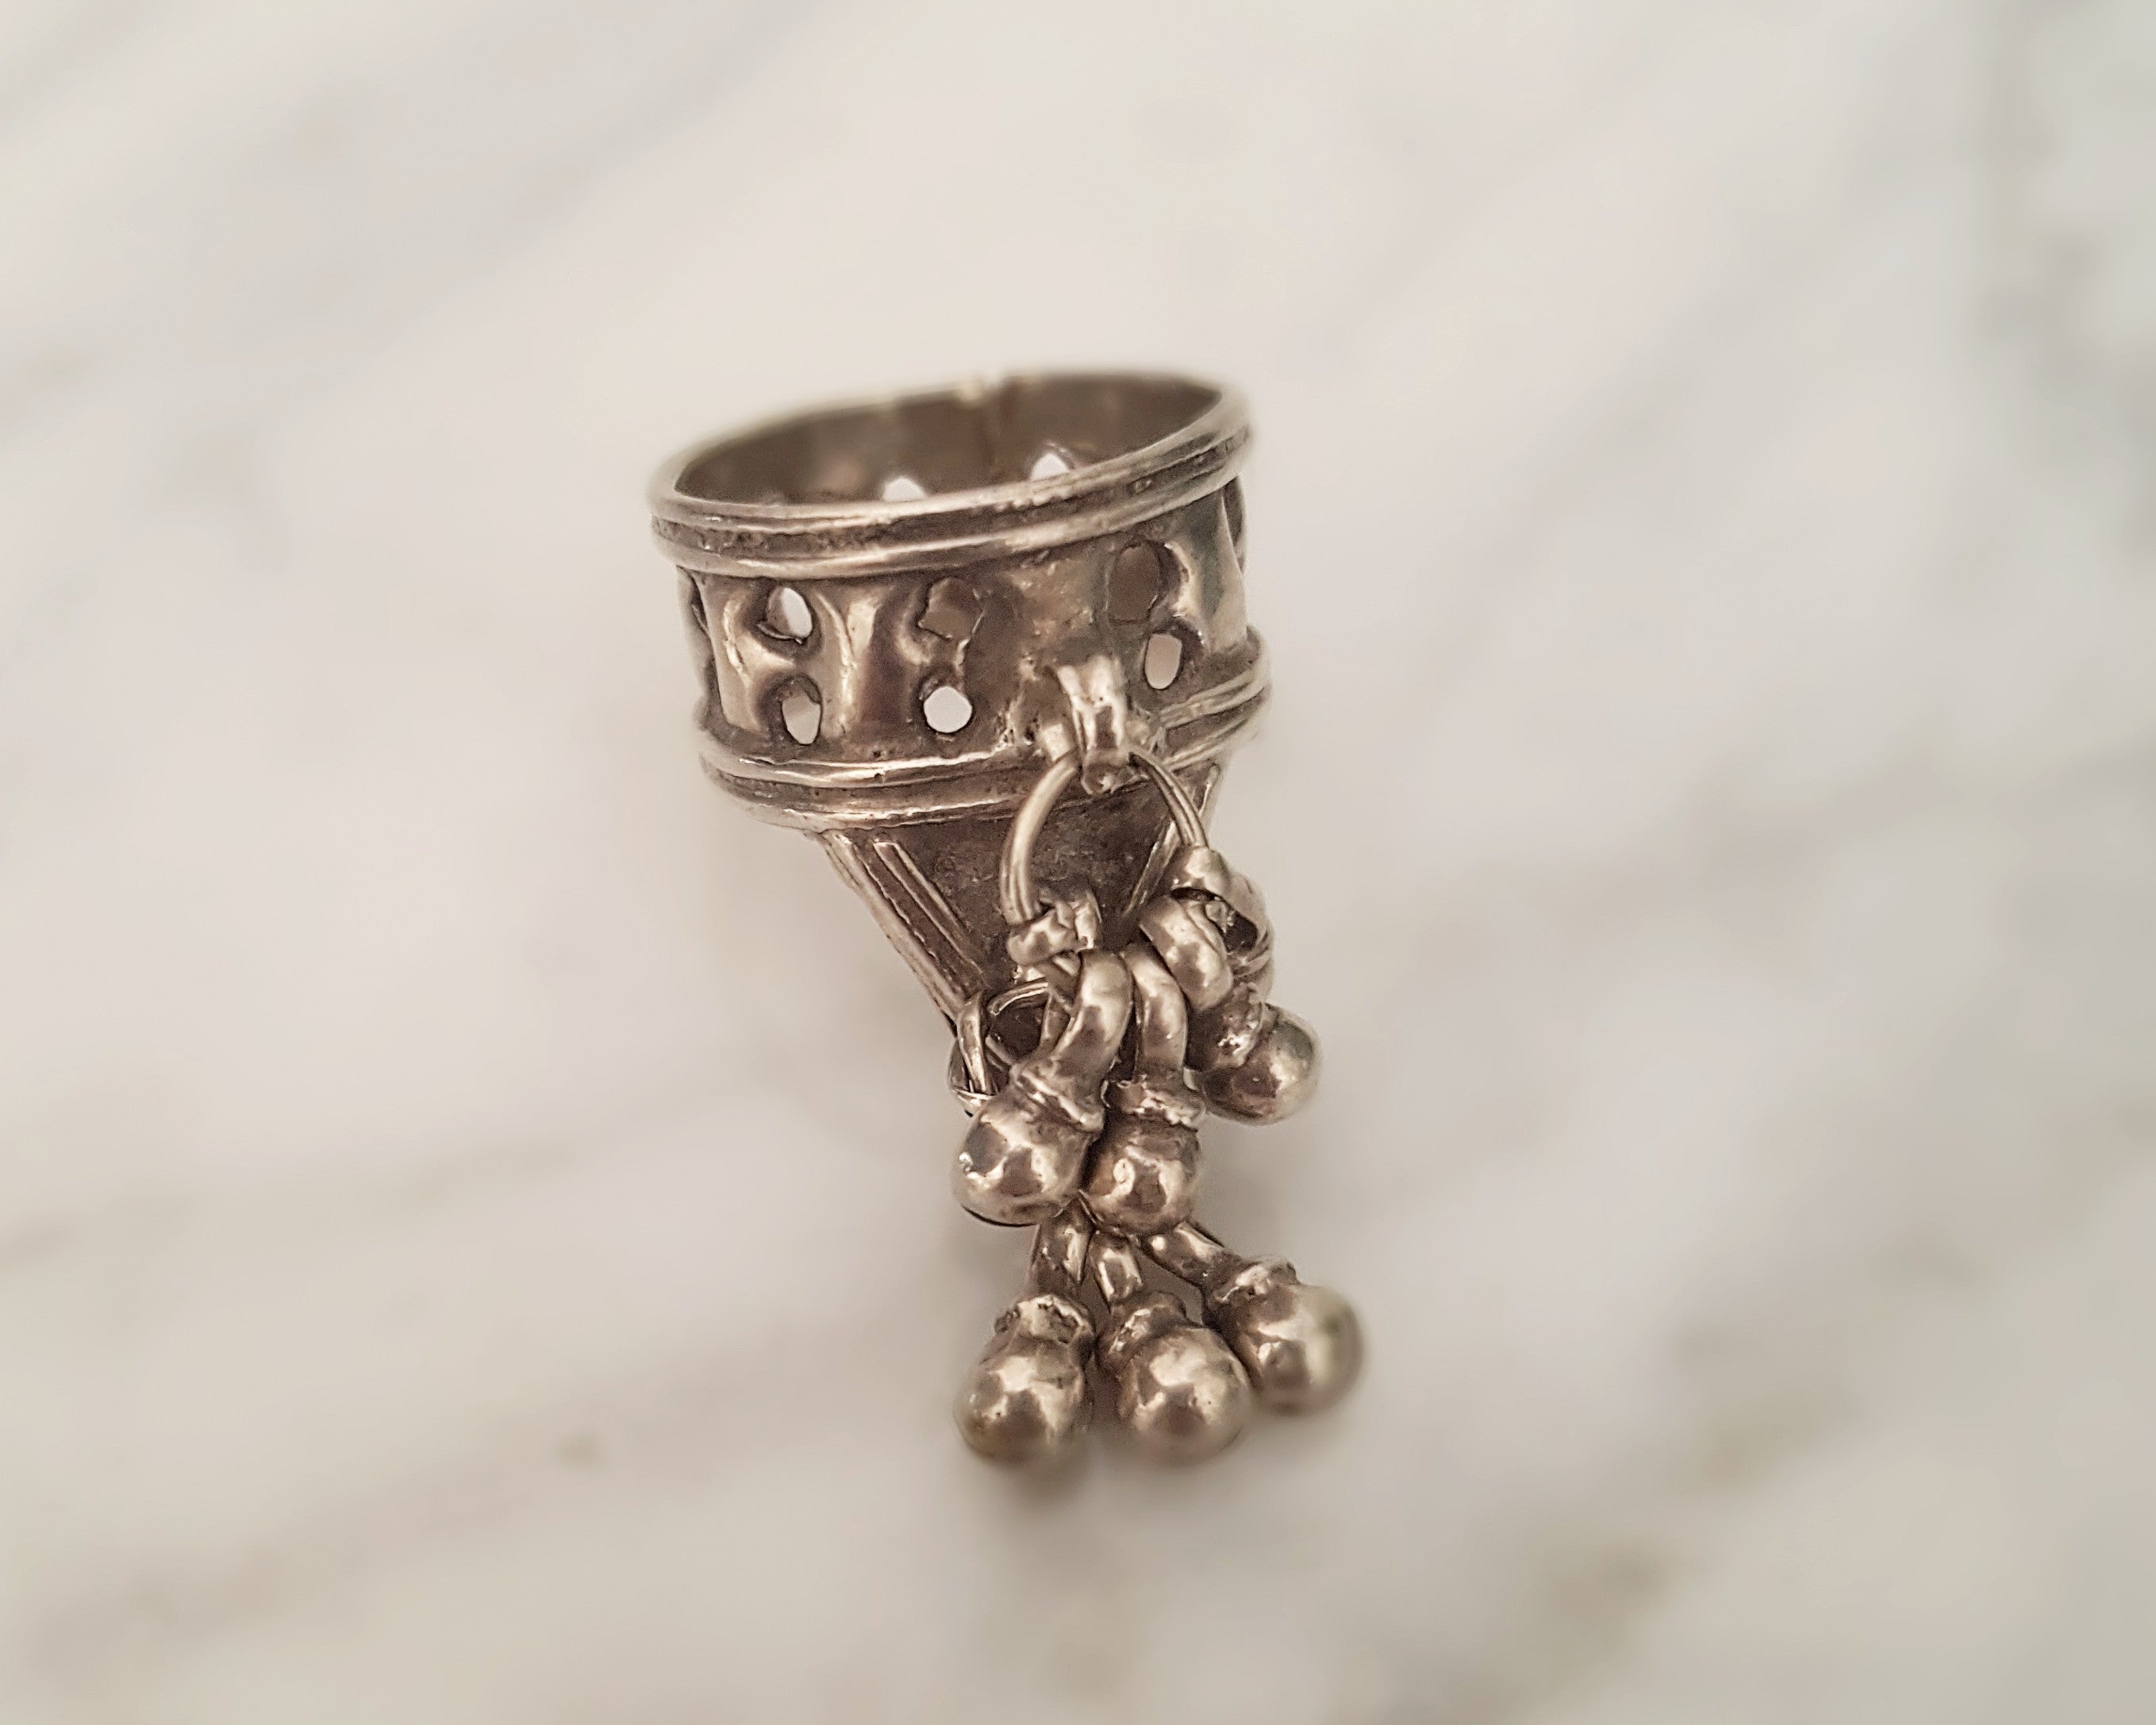 Rajasthani Silver Ring with Bells - Size 5.5